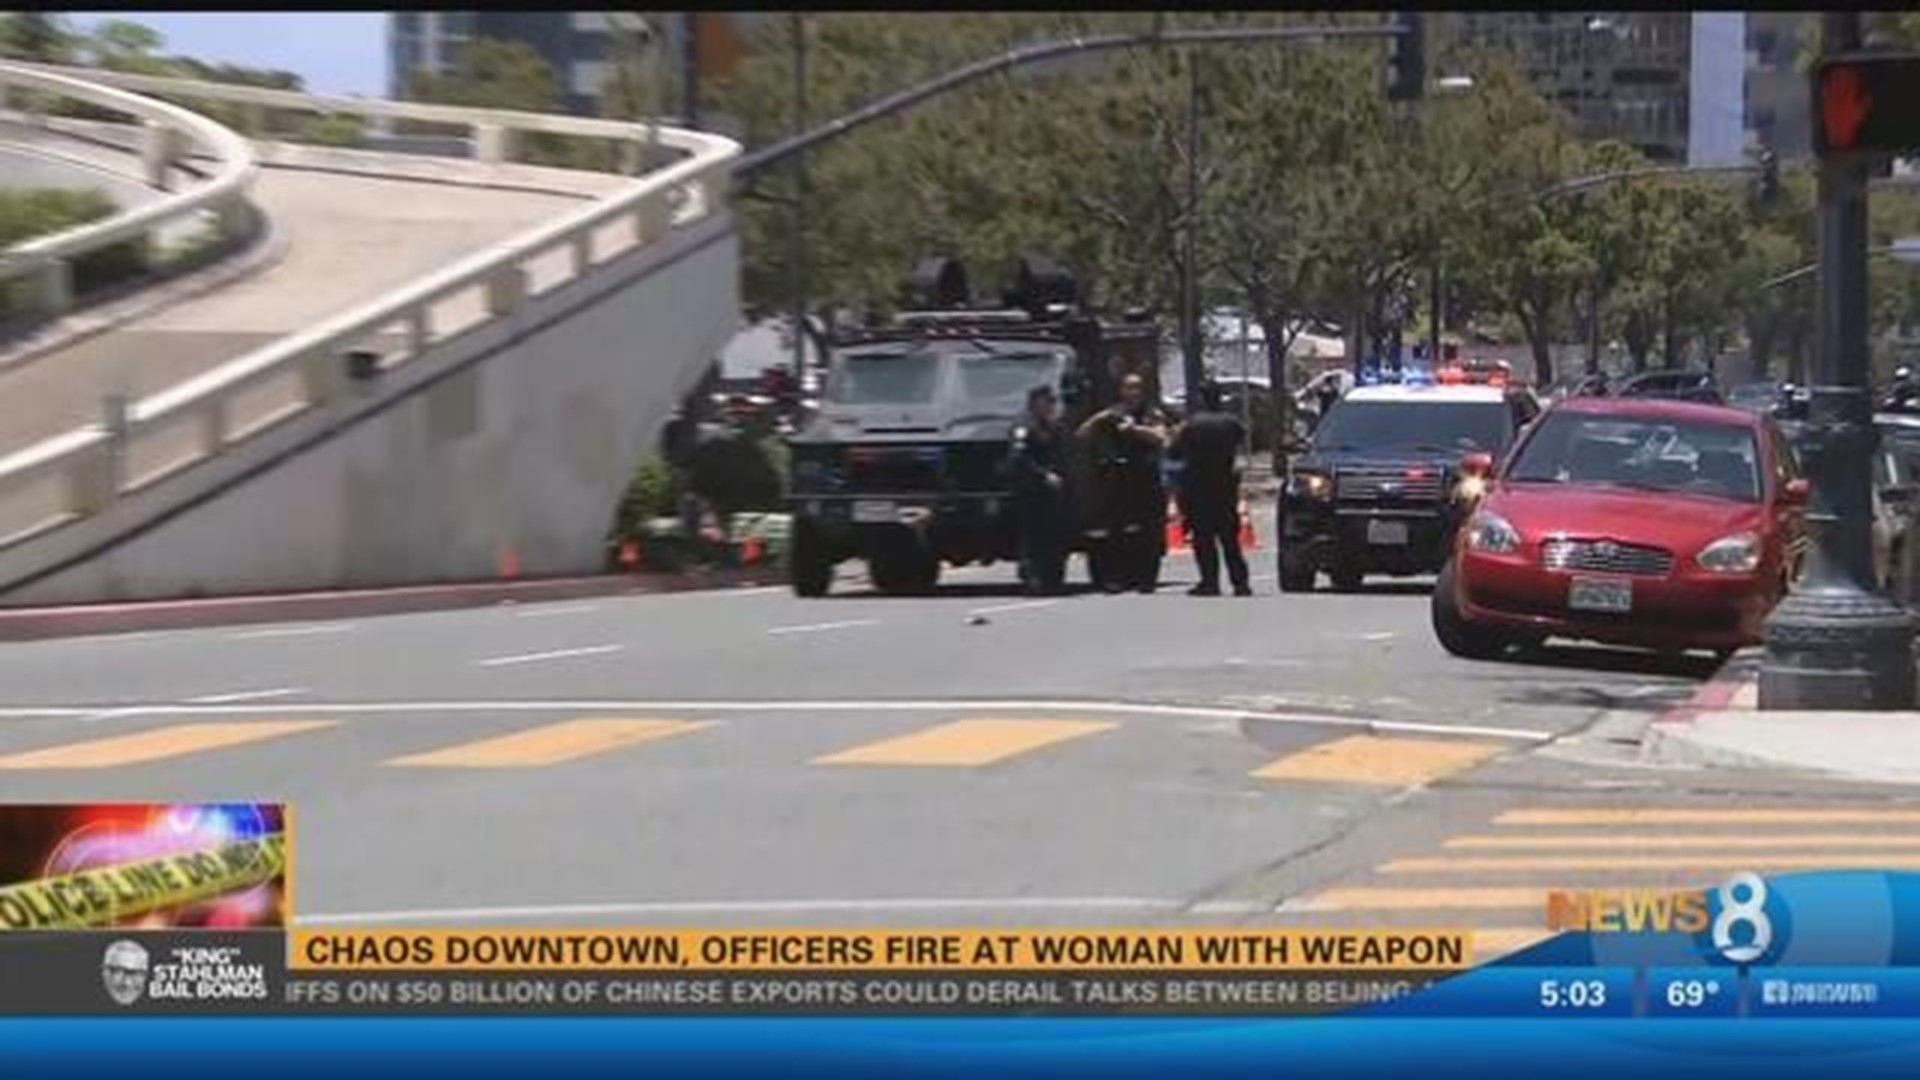 Suspect in custody after shooting incident in downtown San Diego